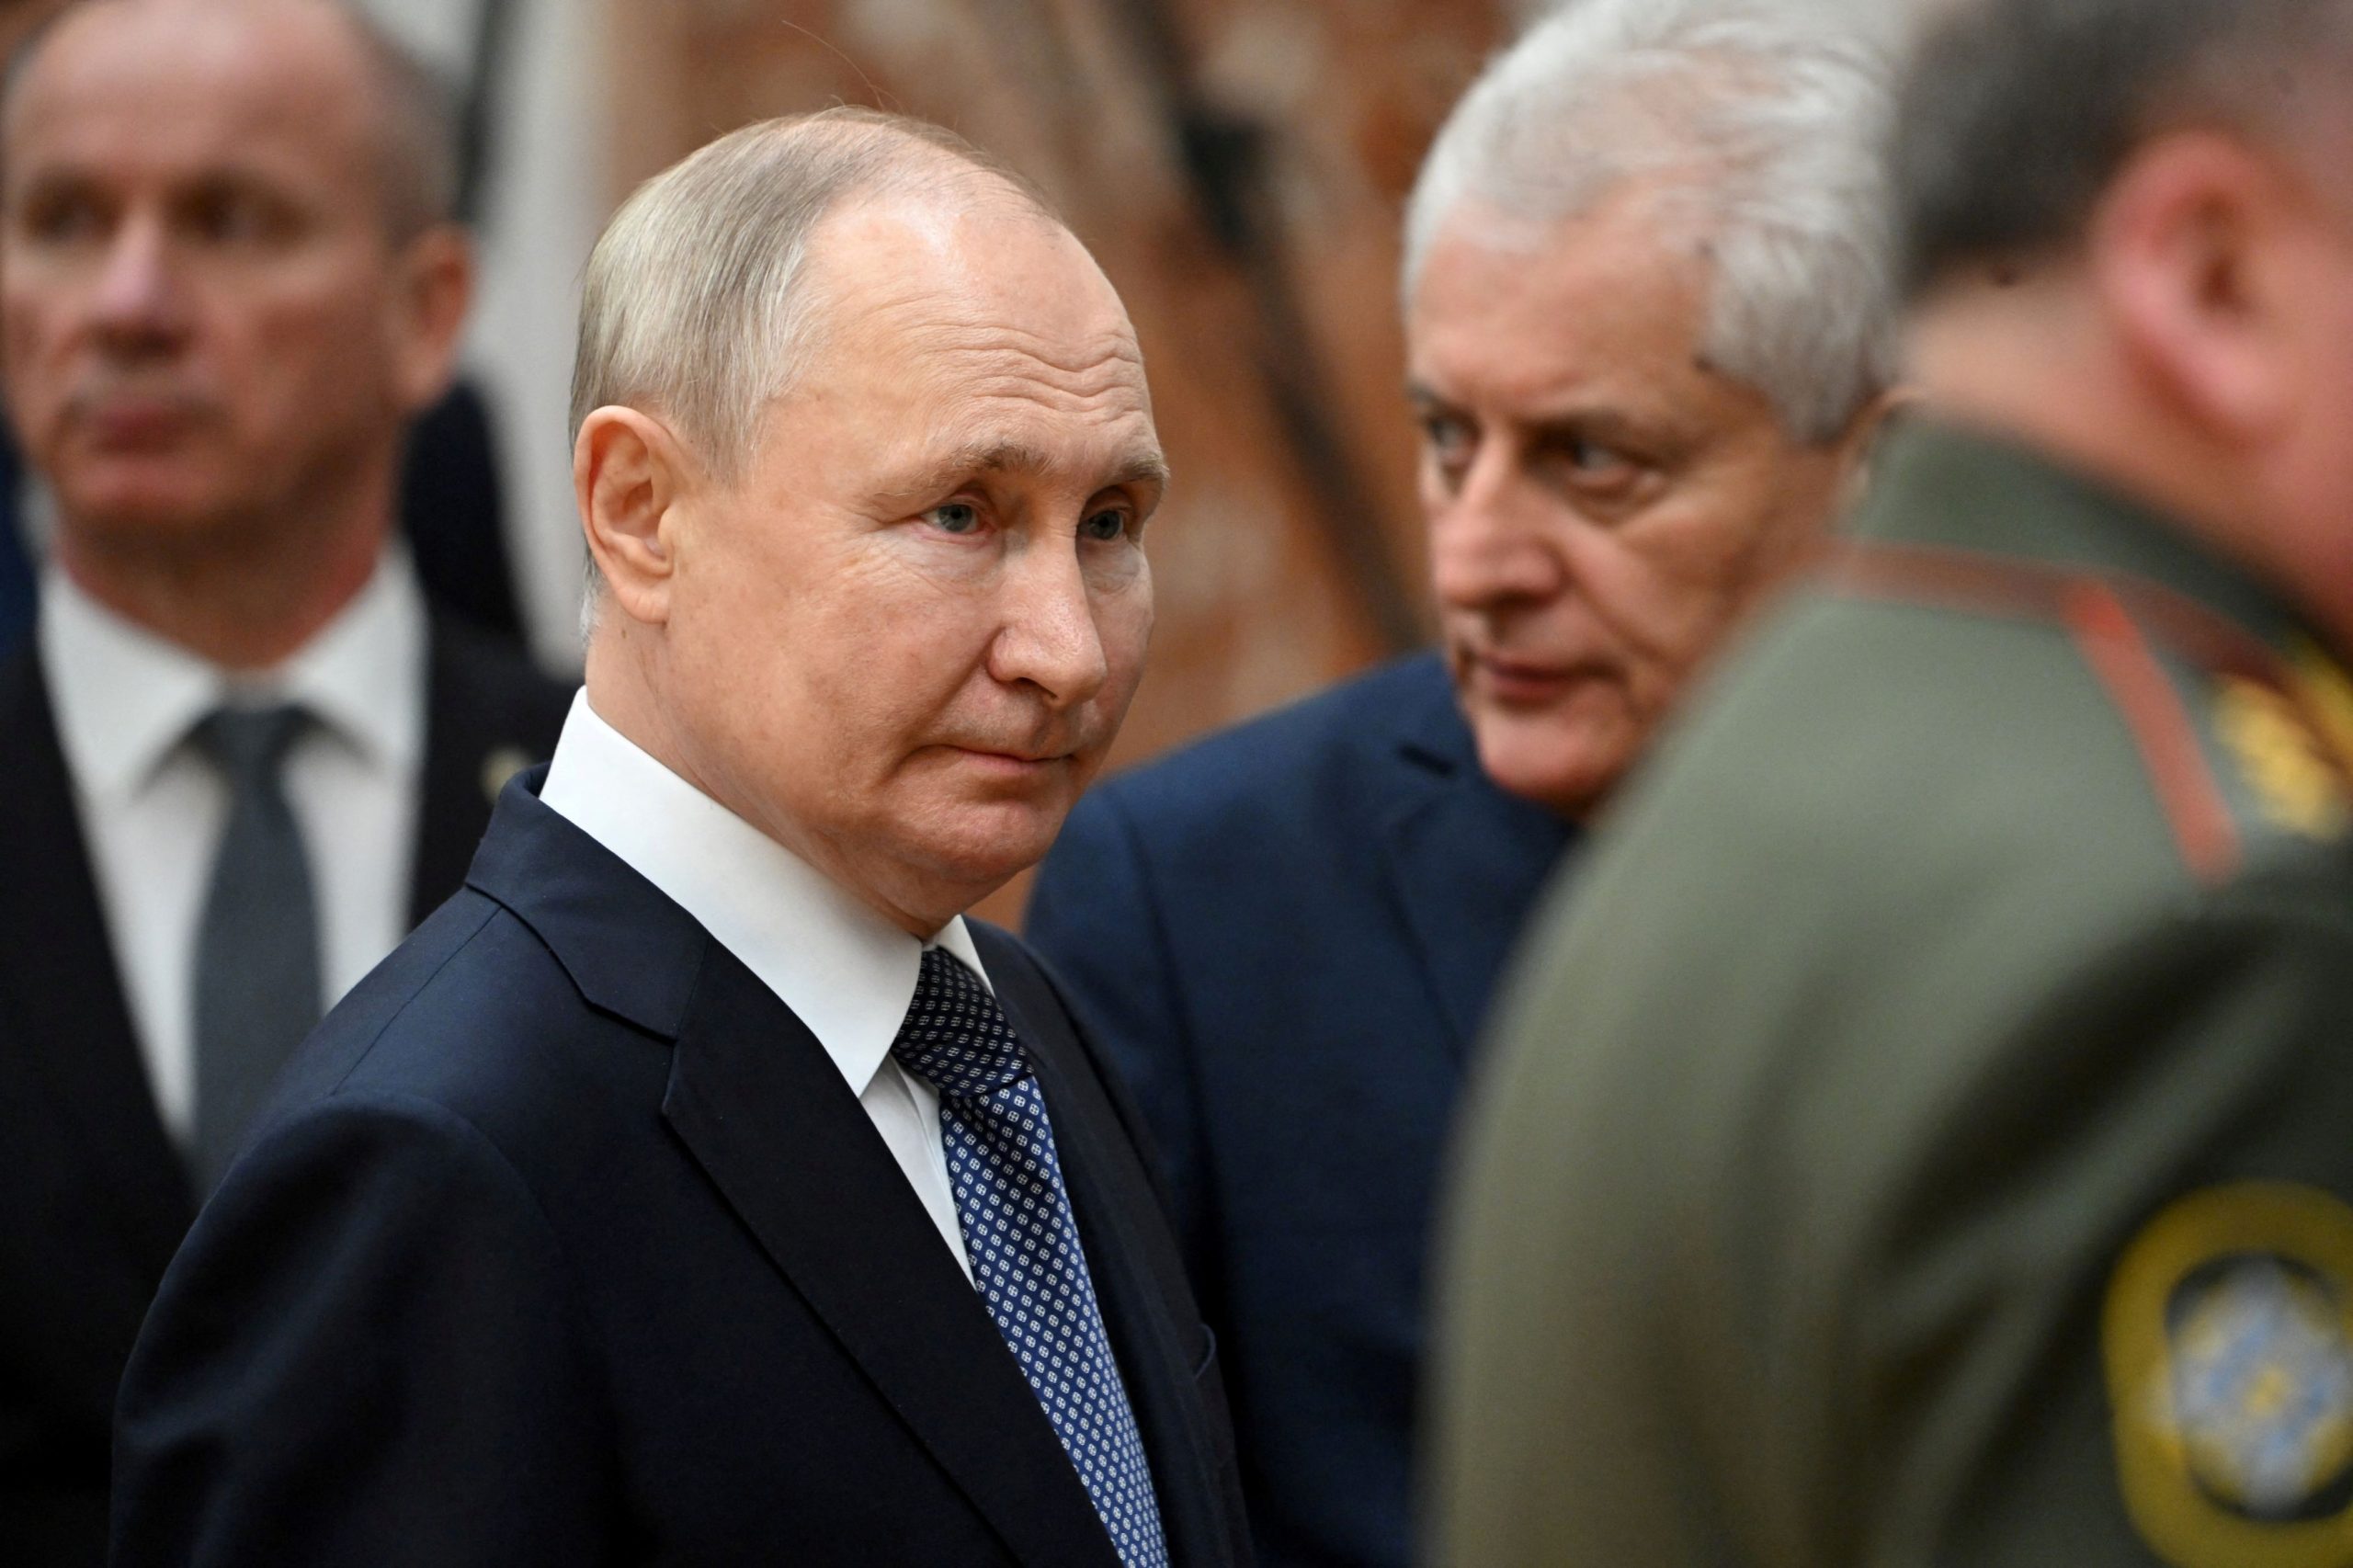 Putin Has Staked Russia’s Resources on Victory in Ukraine. Can the West Match Him?